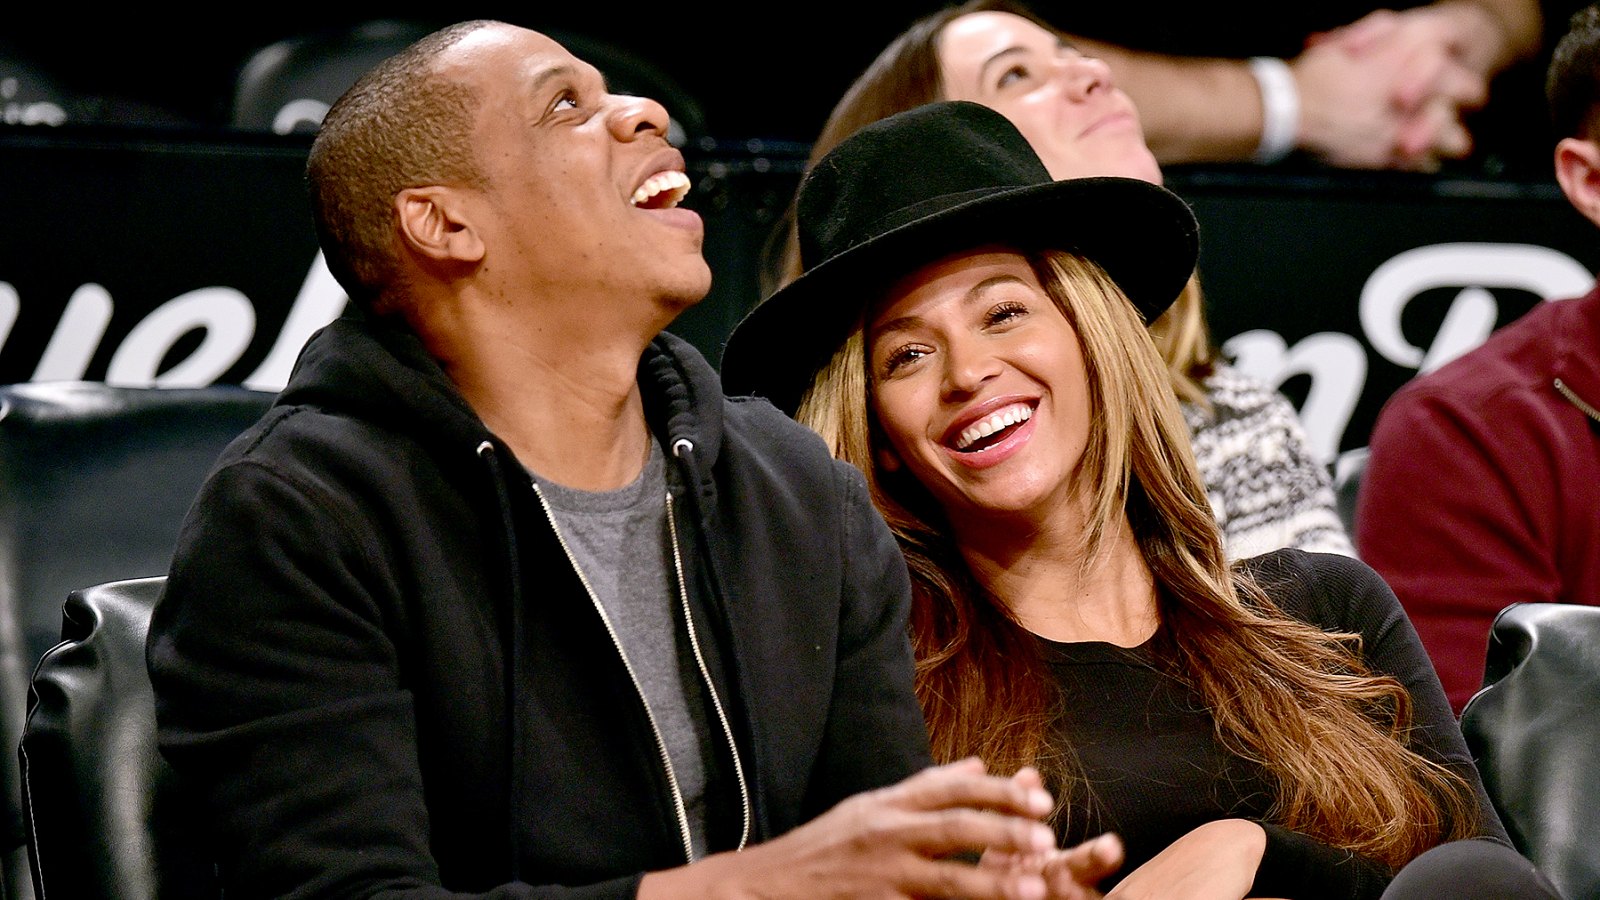 Jay-Z and Beyonce Knowles attend the Houston Rockets vs Brooklyn Nets game at Barclays Center on January 12, 2015 in New York City.